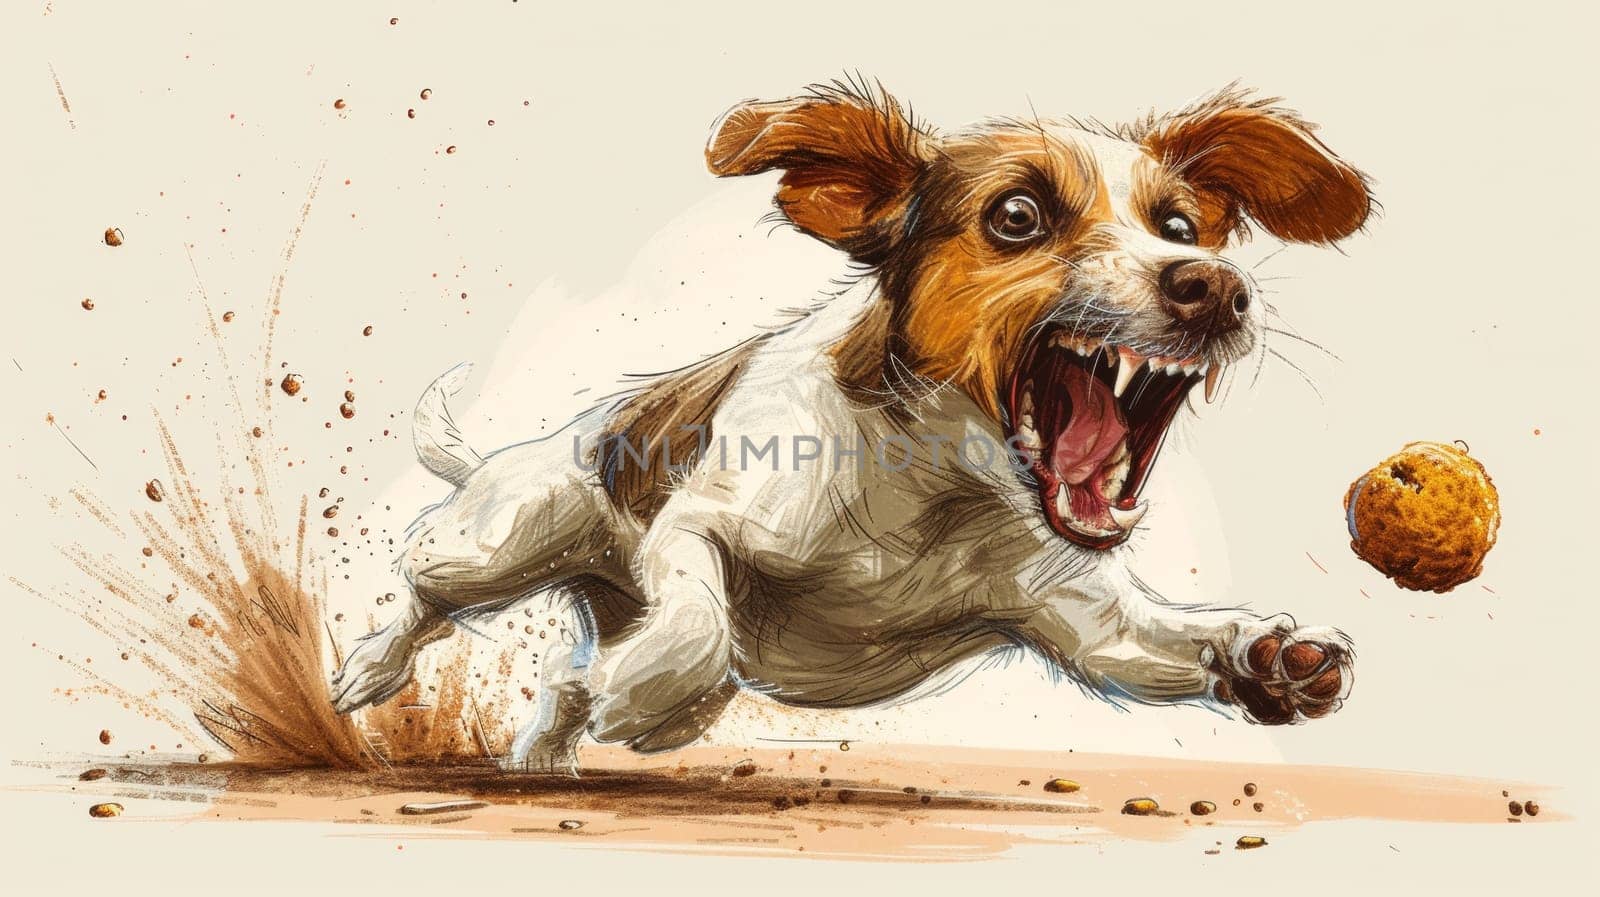 A dog running with a ball in his mouth, and the ground is covered